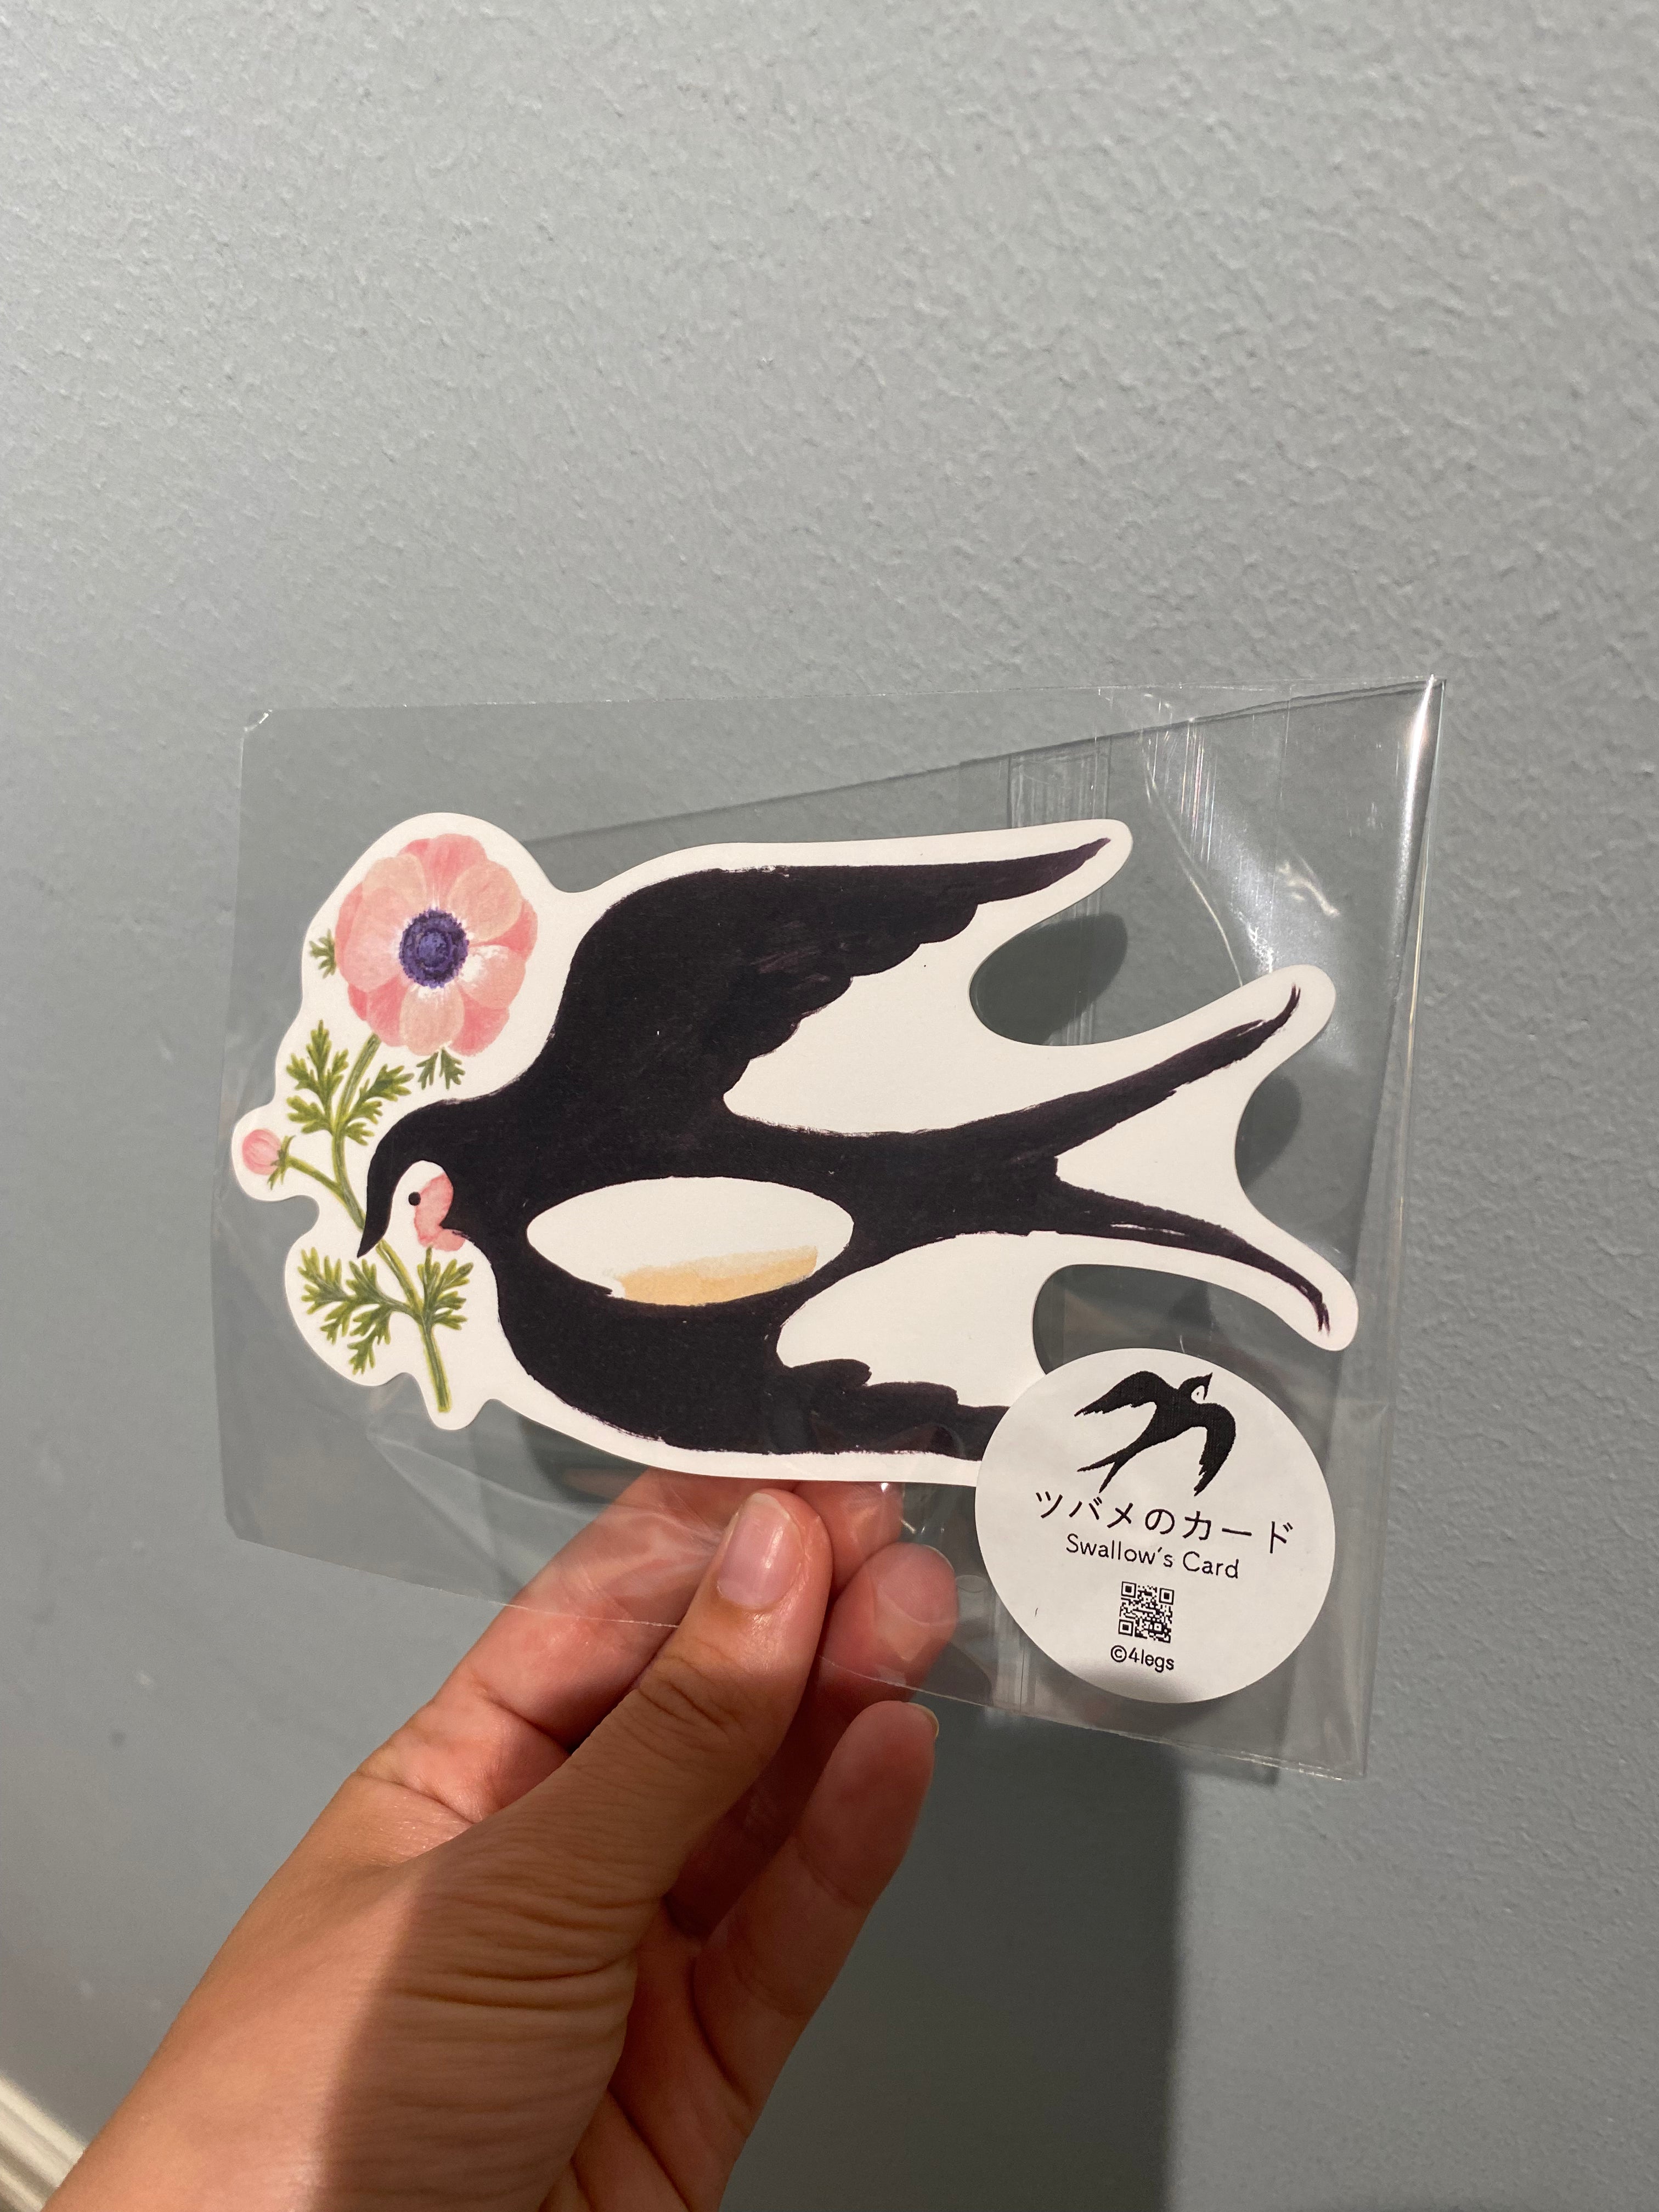 Card with large swallow and flower